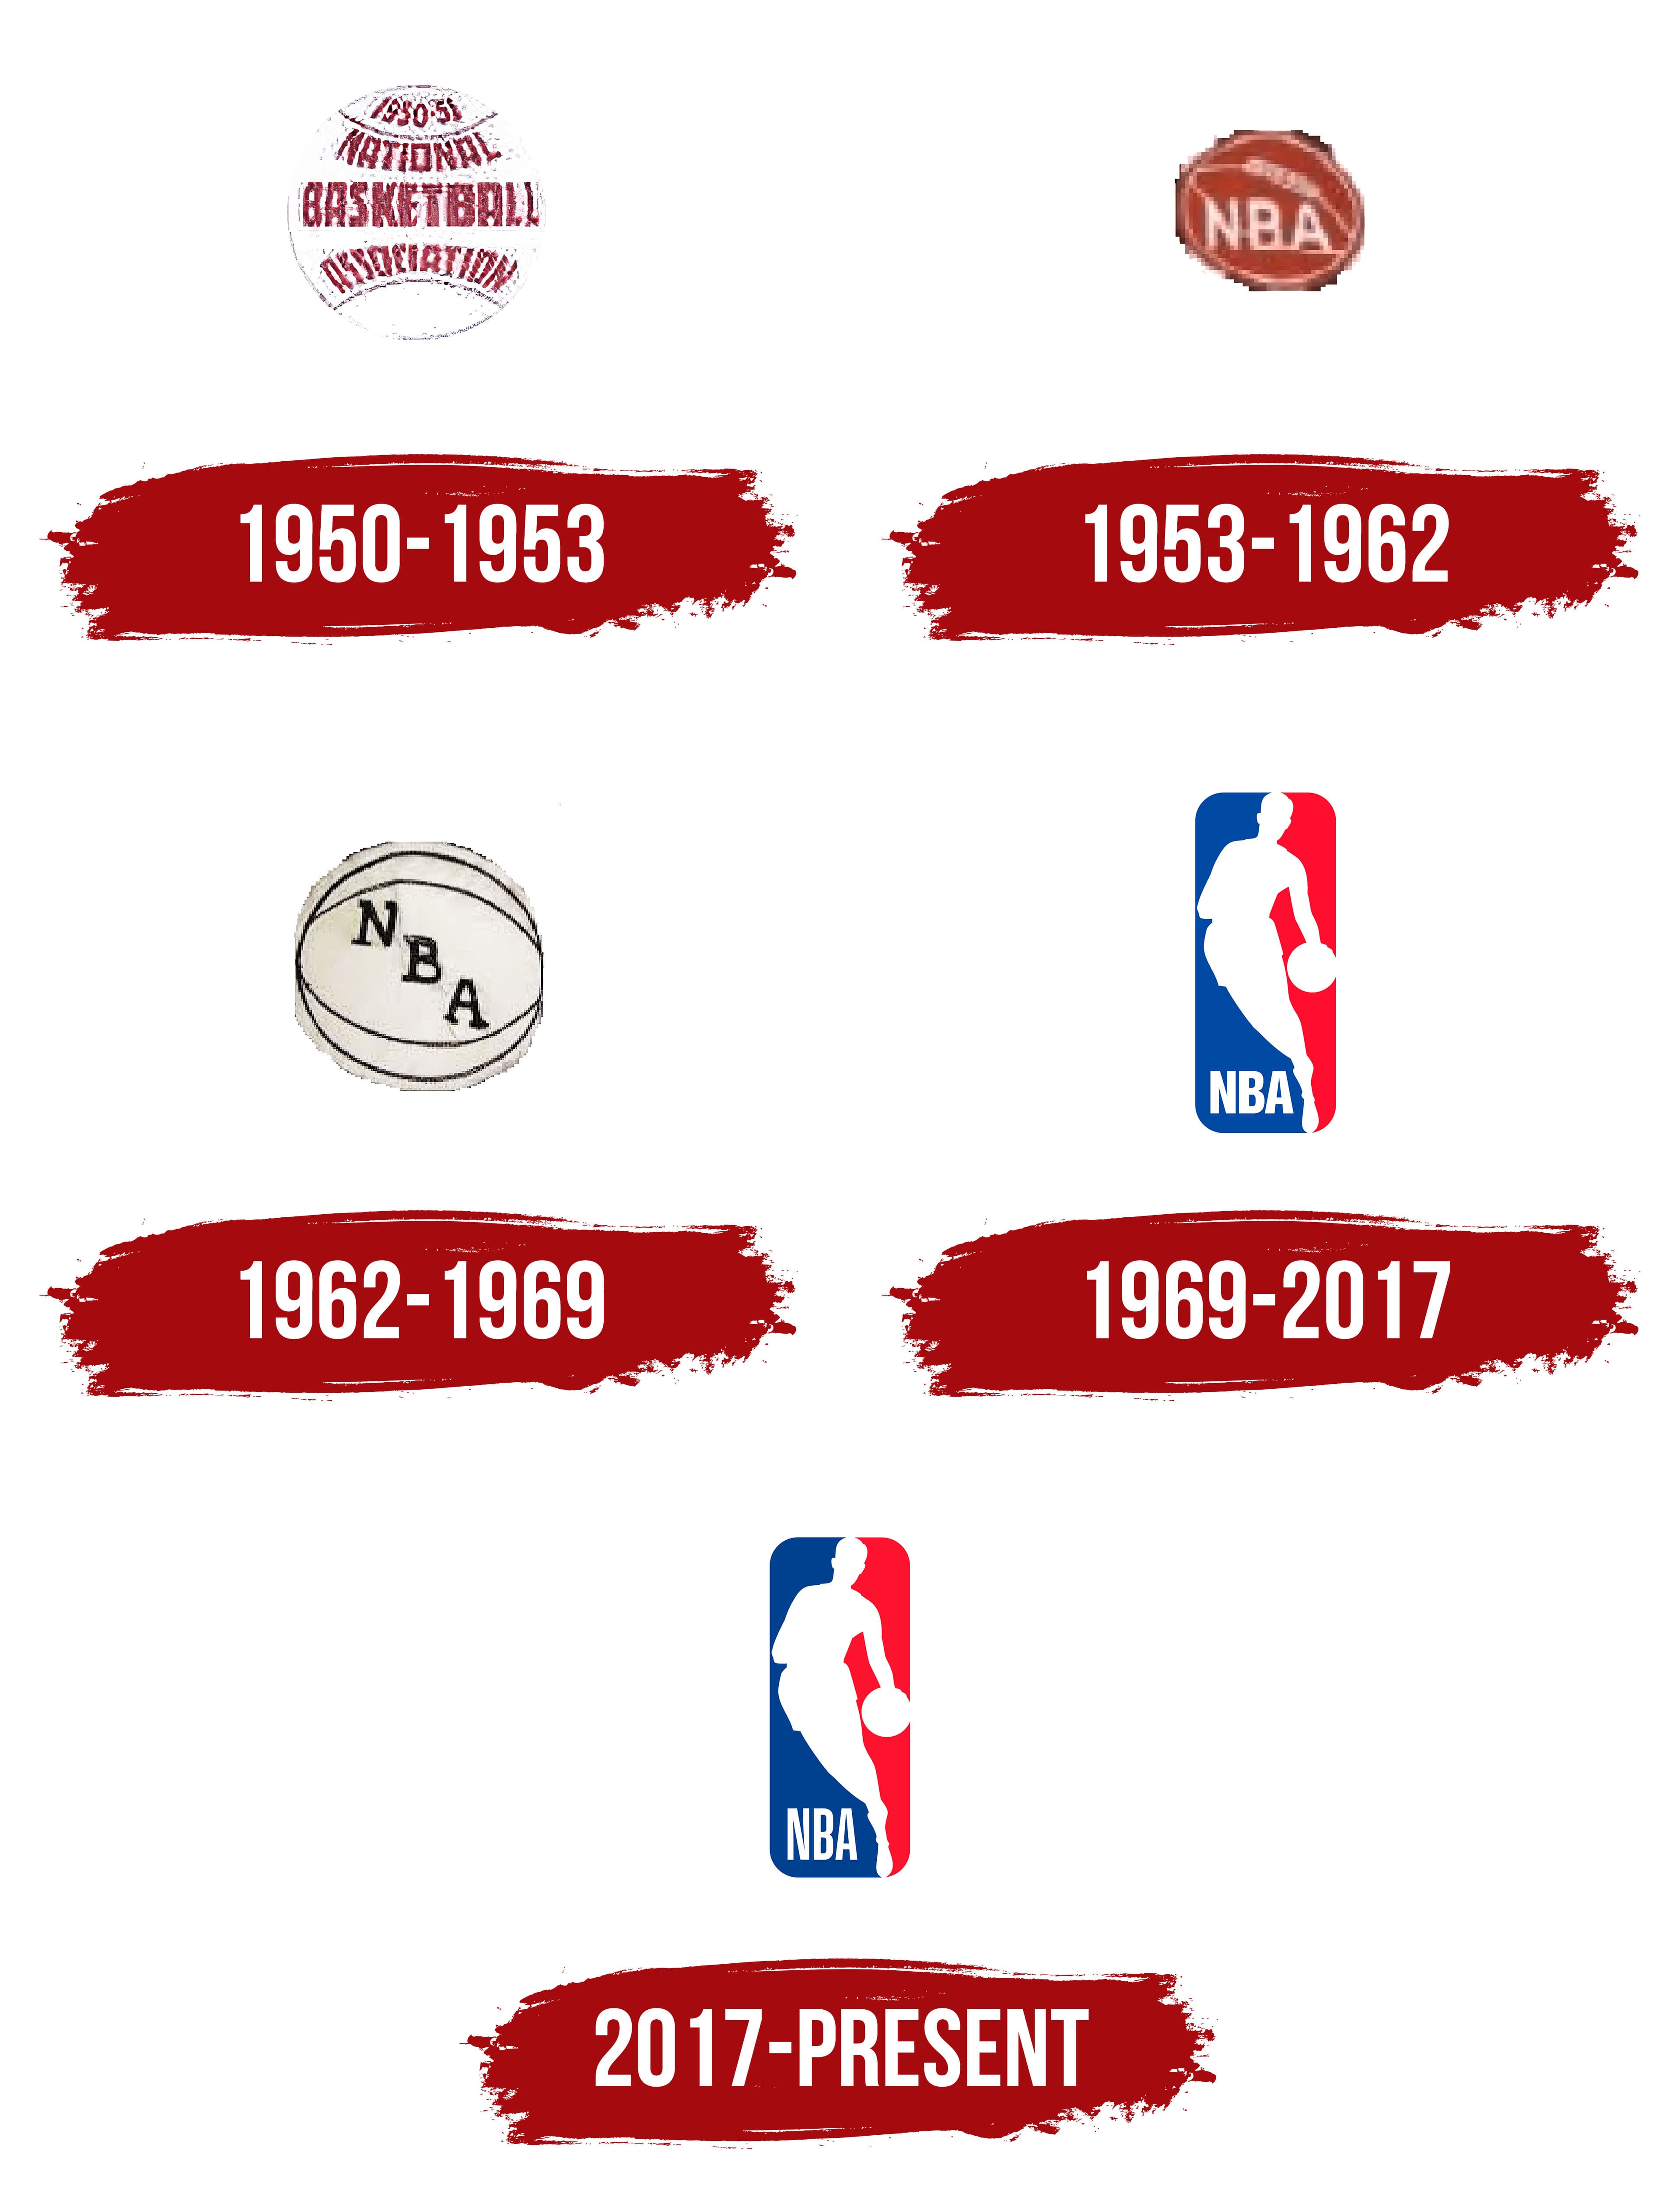 NBA Logo, symbol, meaning, history, PNG, brand